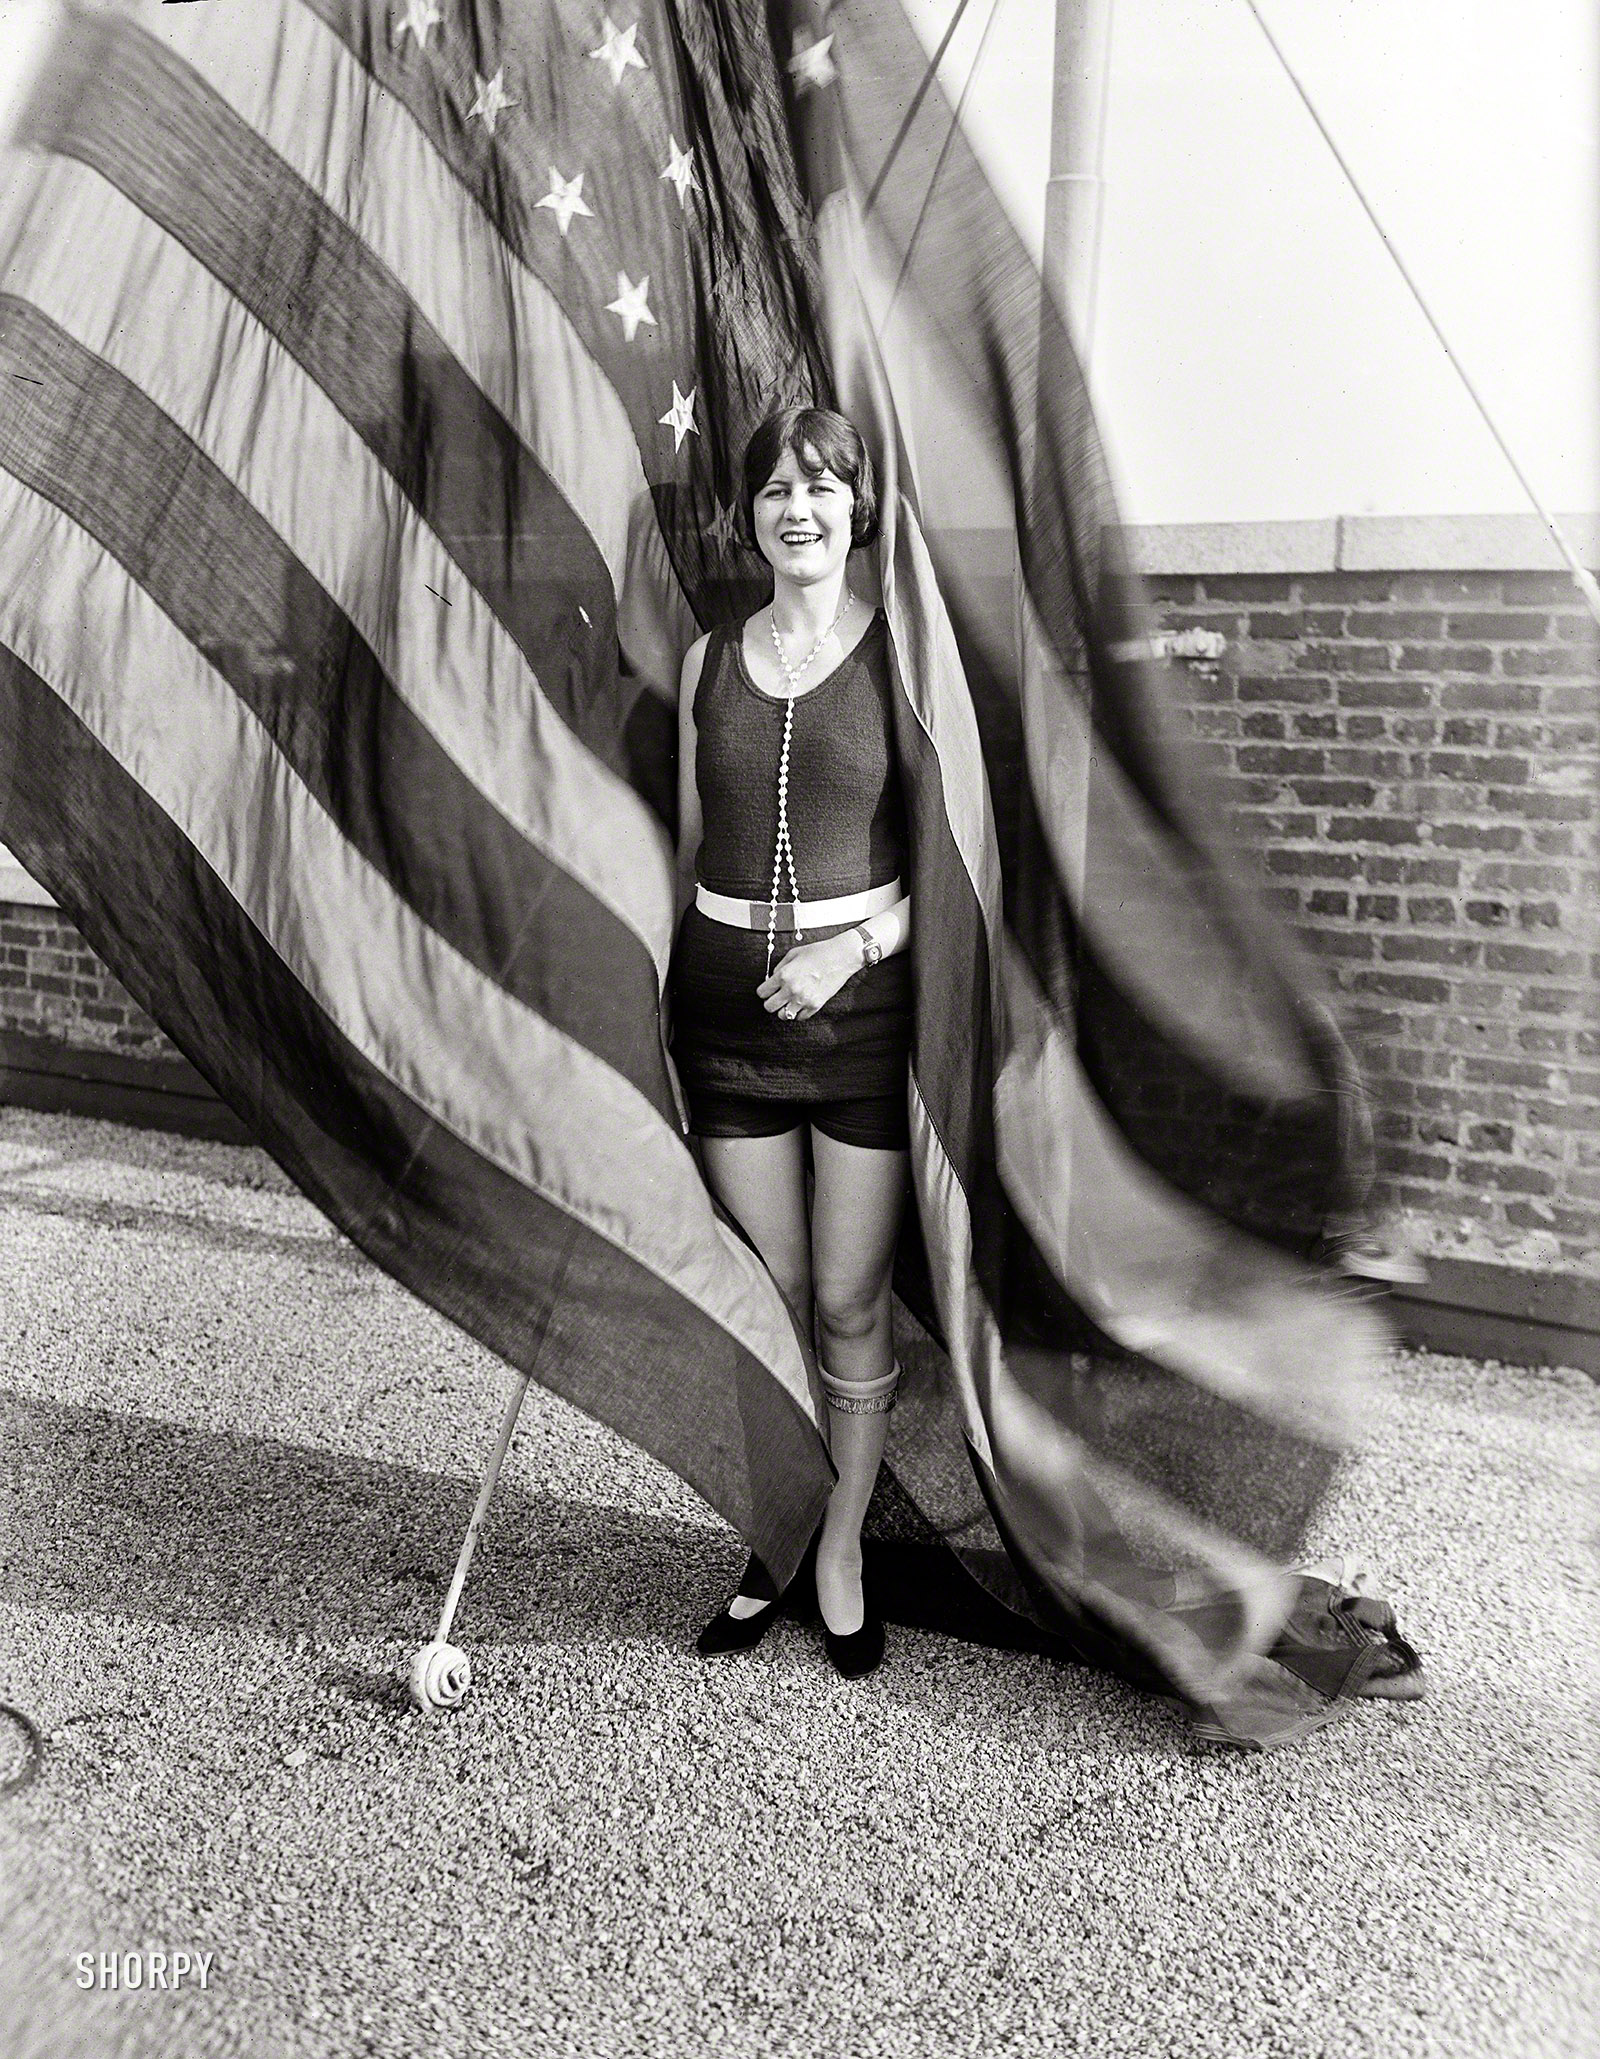 From 1924 comes our patriotic girl with the pearls in a Harris & Ewing plate labeled NO CAPTION. Happy Independence Day from Shorpy! View full size.